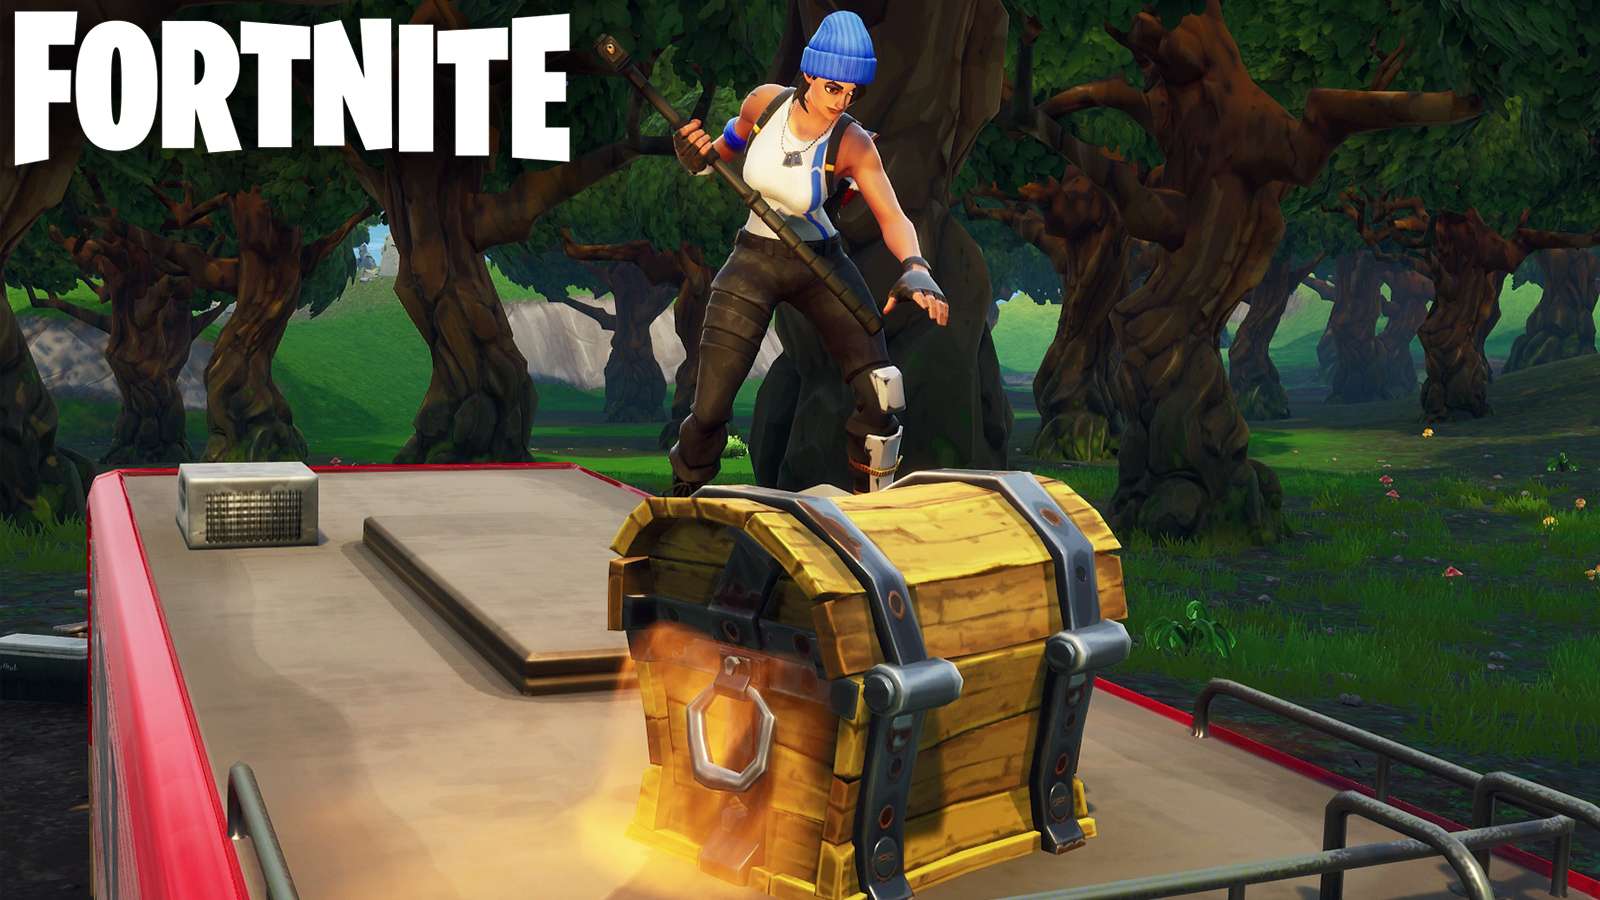 Fortnite character opening a chest.